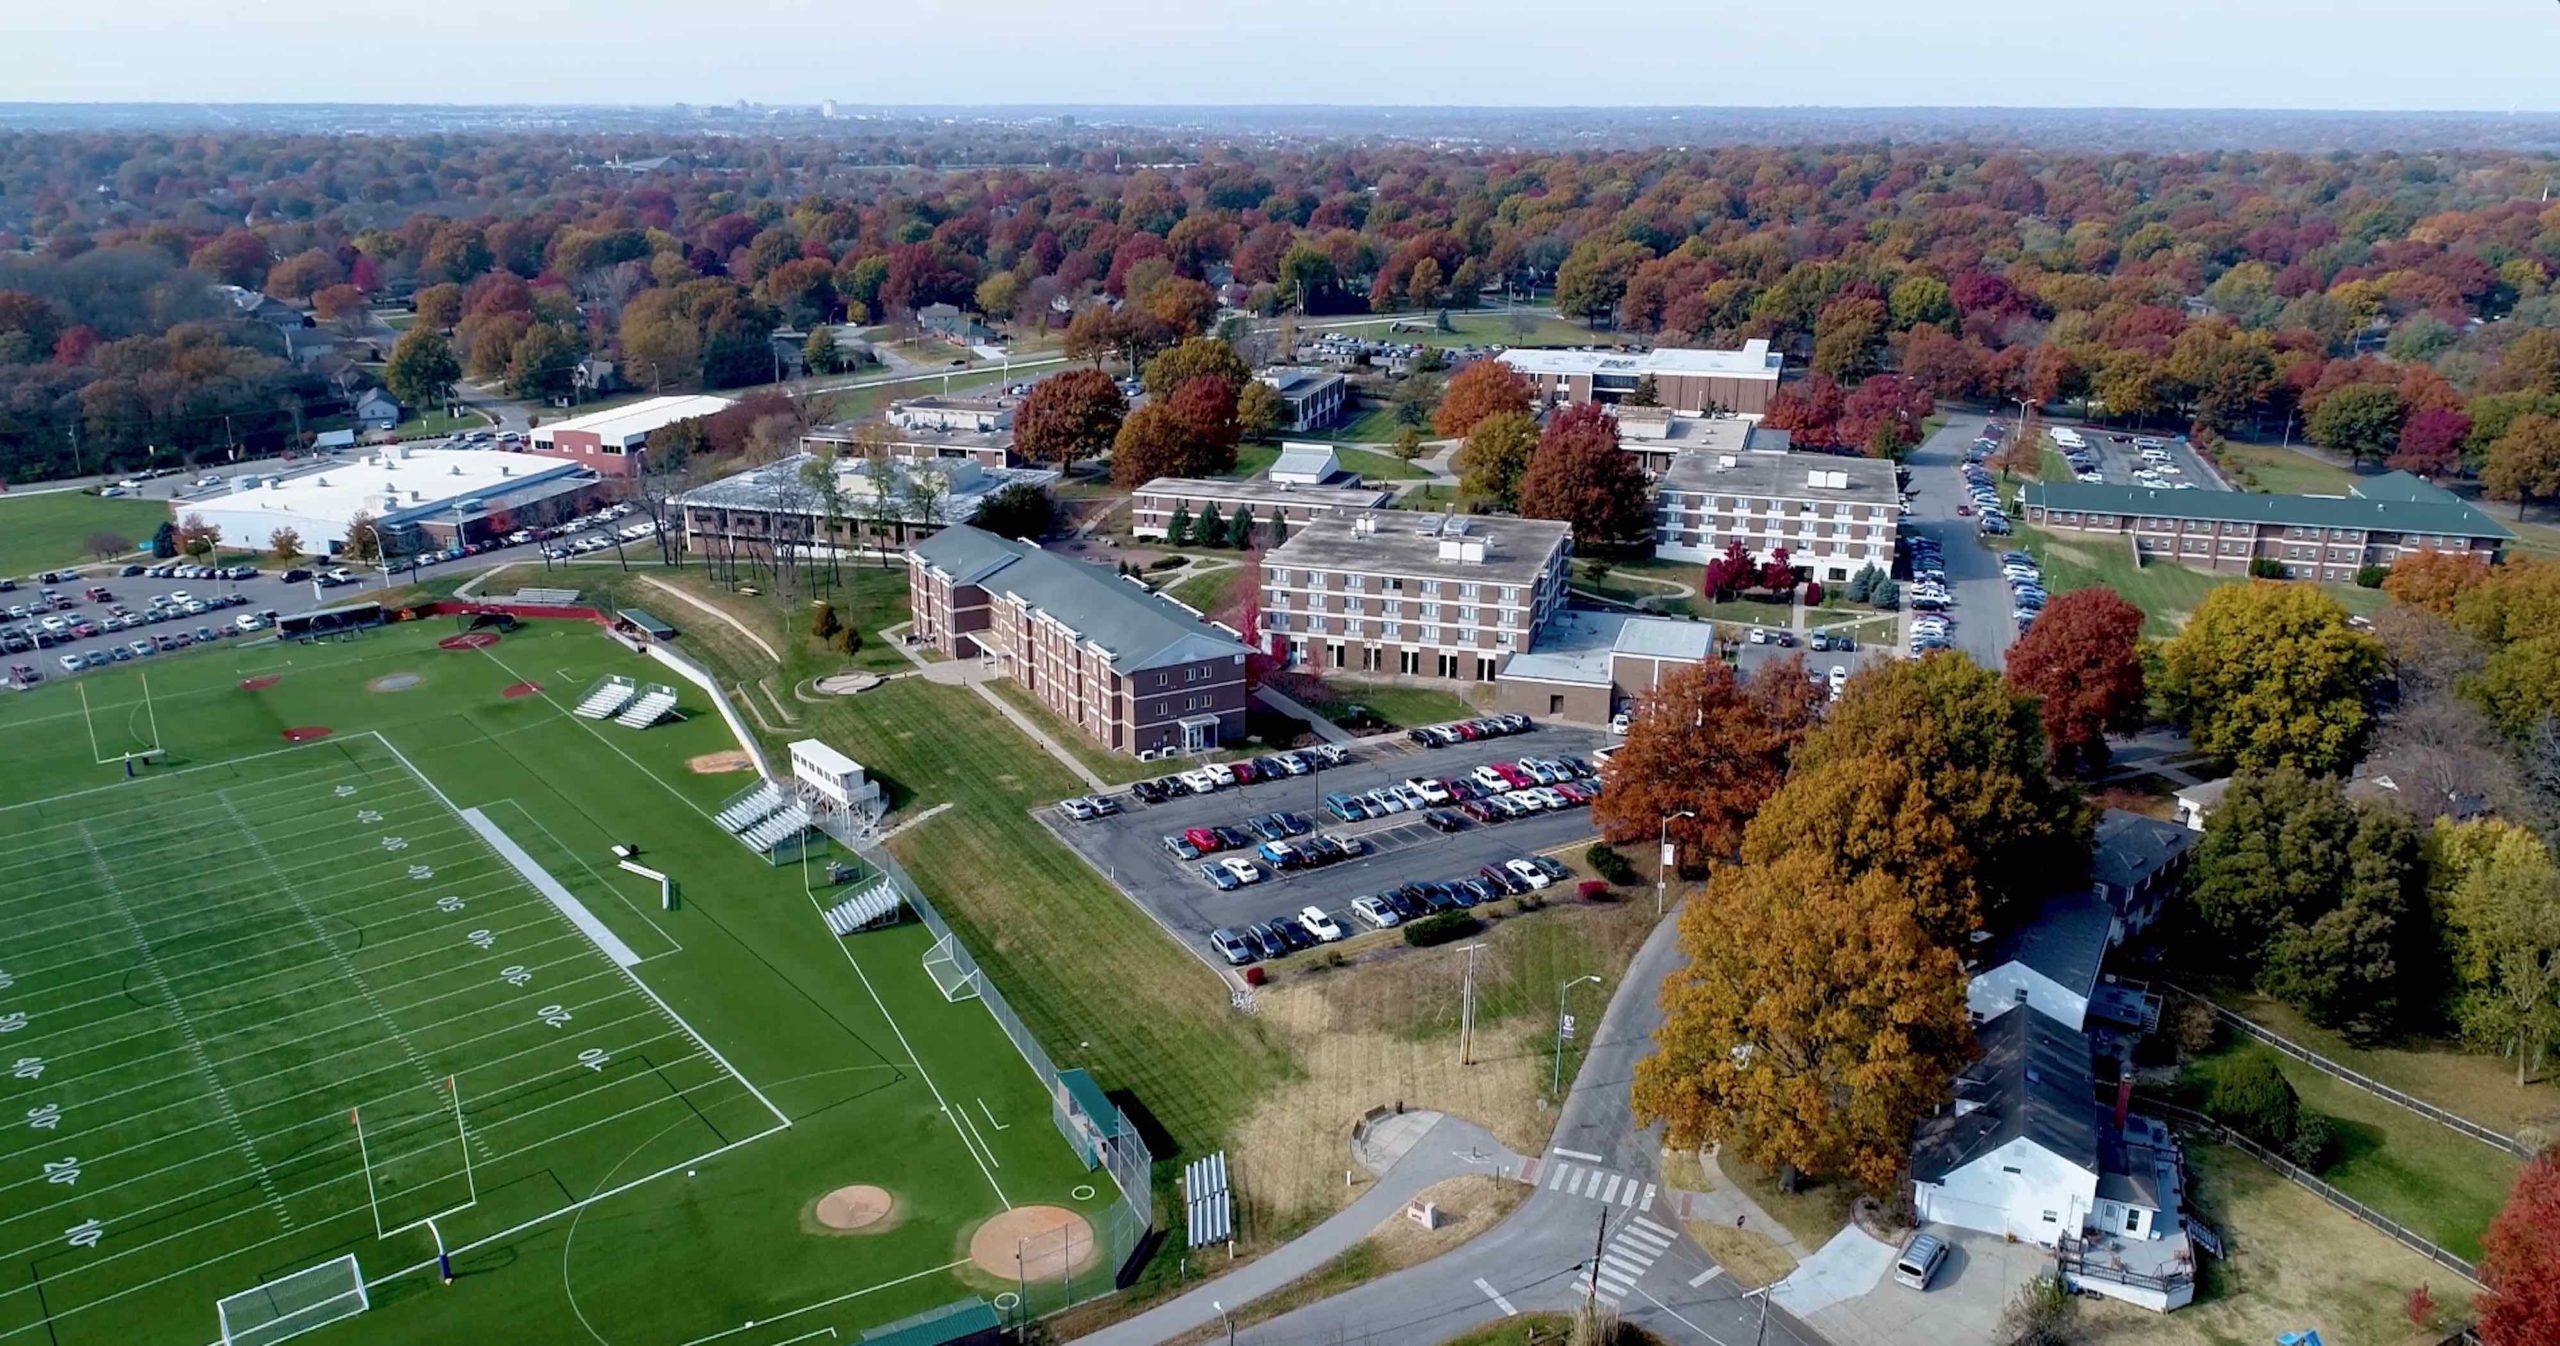 Aerial image of the Avila campus from the southeast side looking toward the northwest in the fall